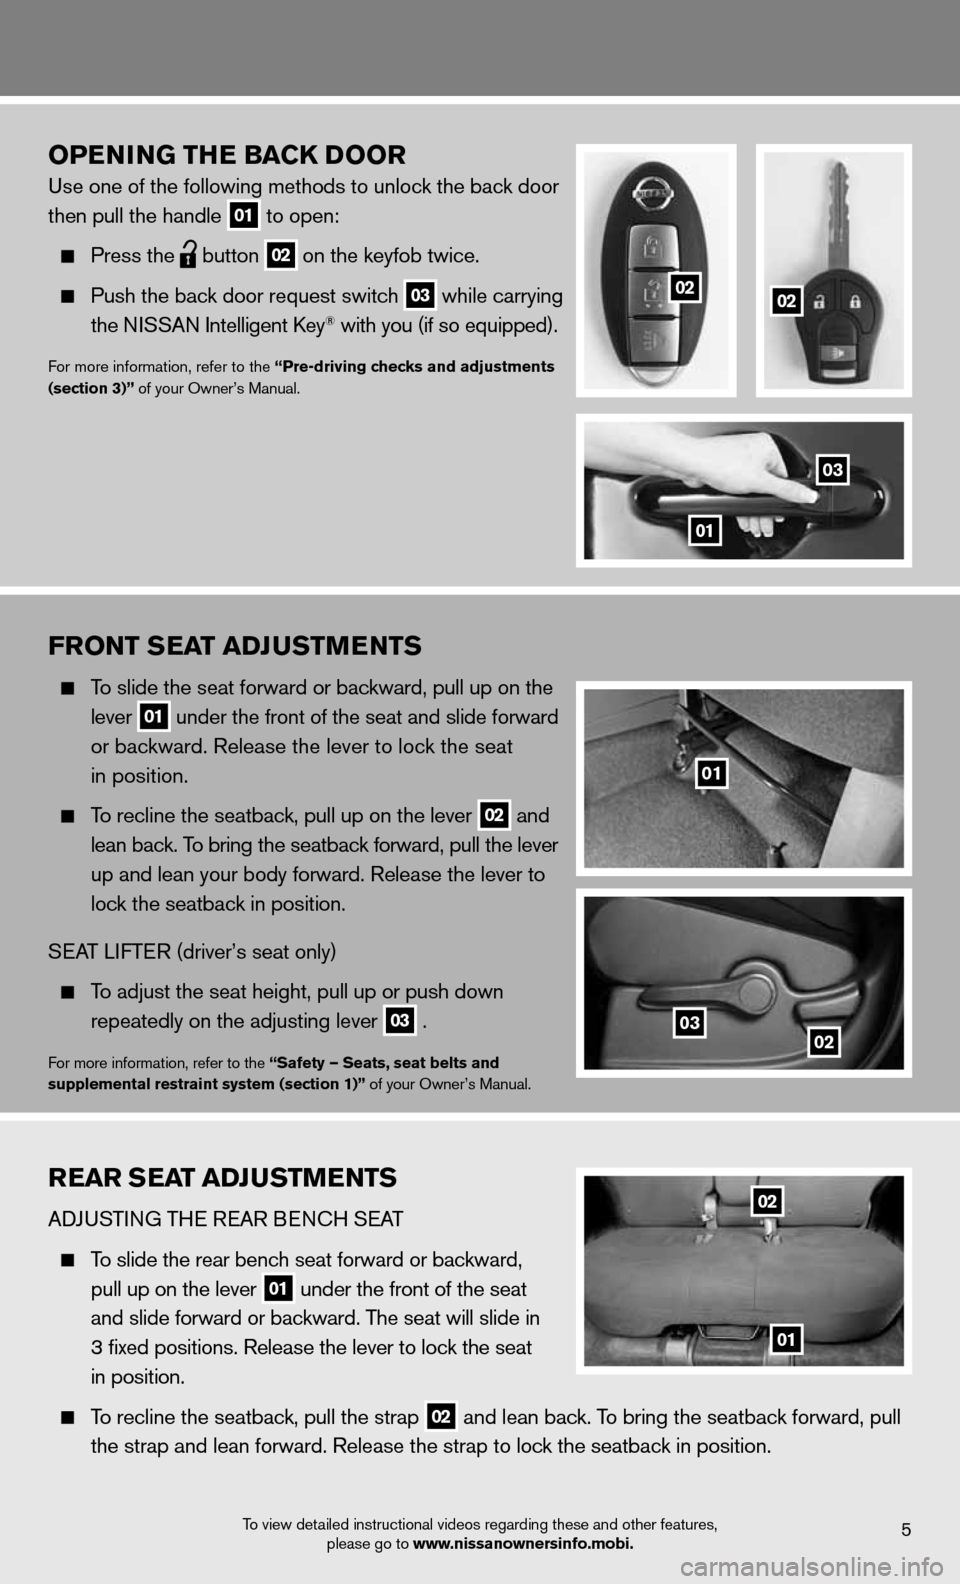 NISSAN CUBE 2012 3.G Quick Reference Guide OPeNING TH e BaCK DOOr
use one of the following methods to unlock the back door 
then pull the handle
 
01 to open:
 
  Press the
  button
 02 on the keyfob twice.
 
  Push the back door request switc